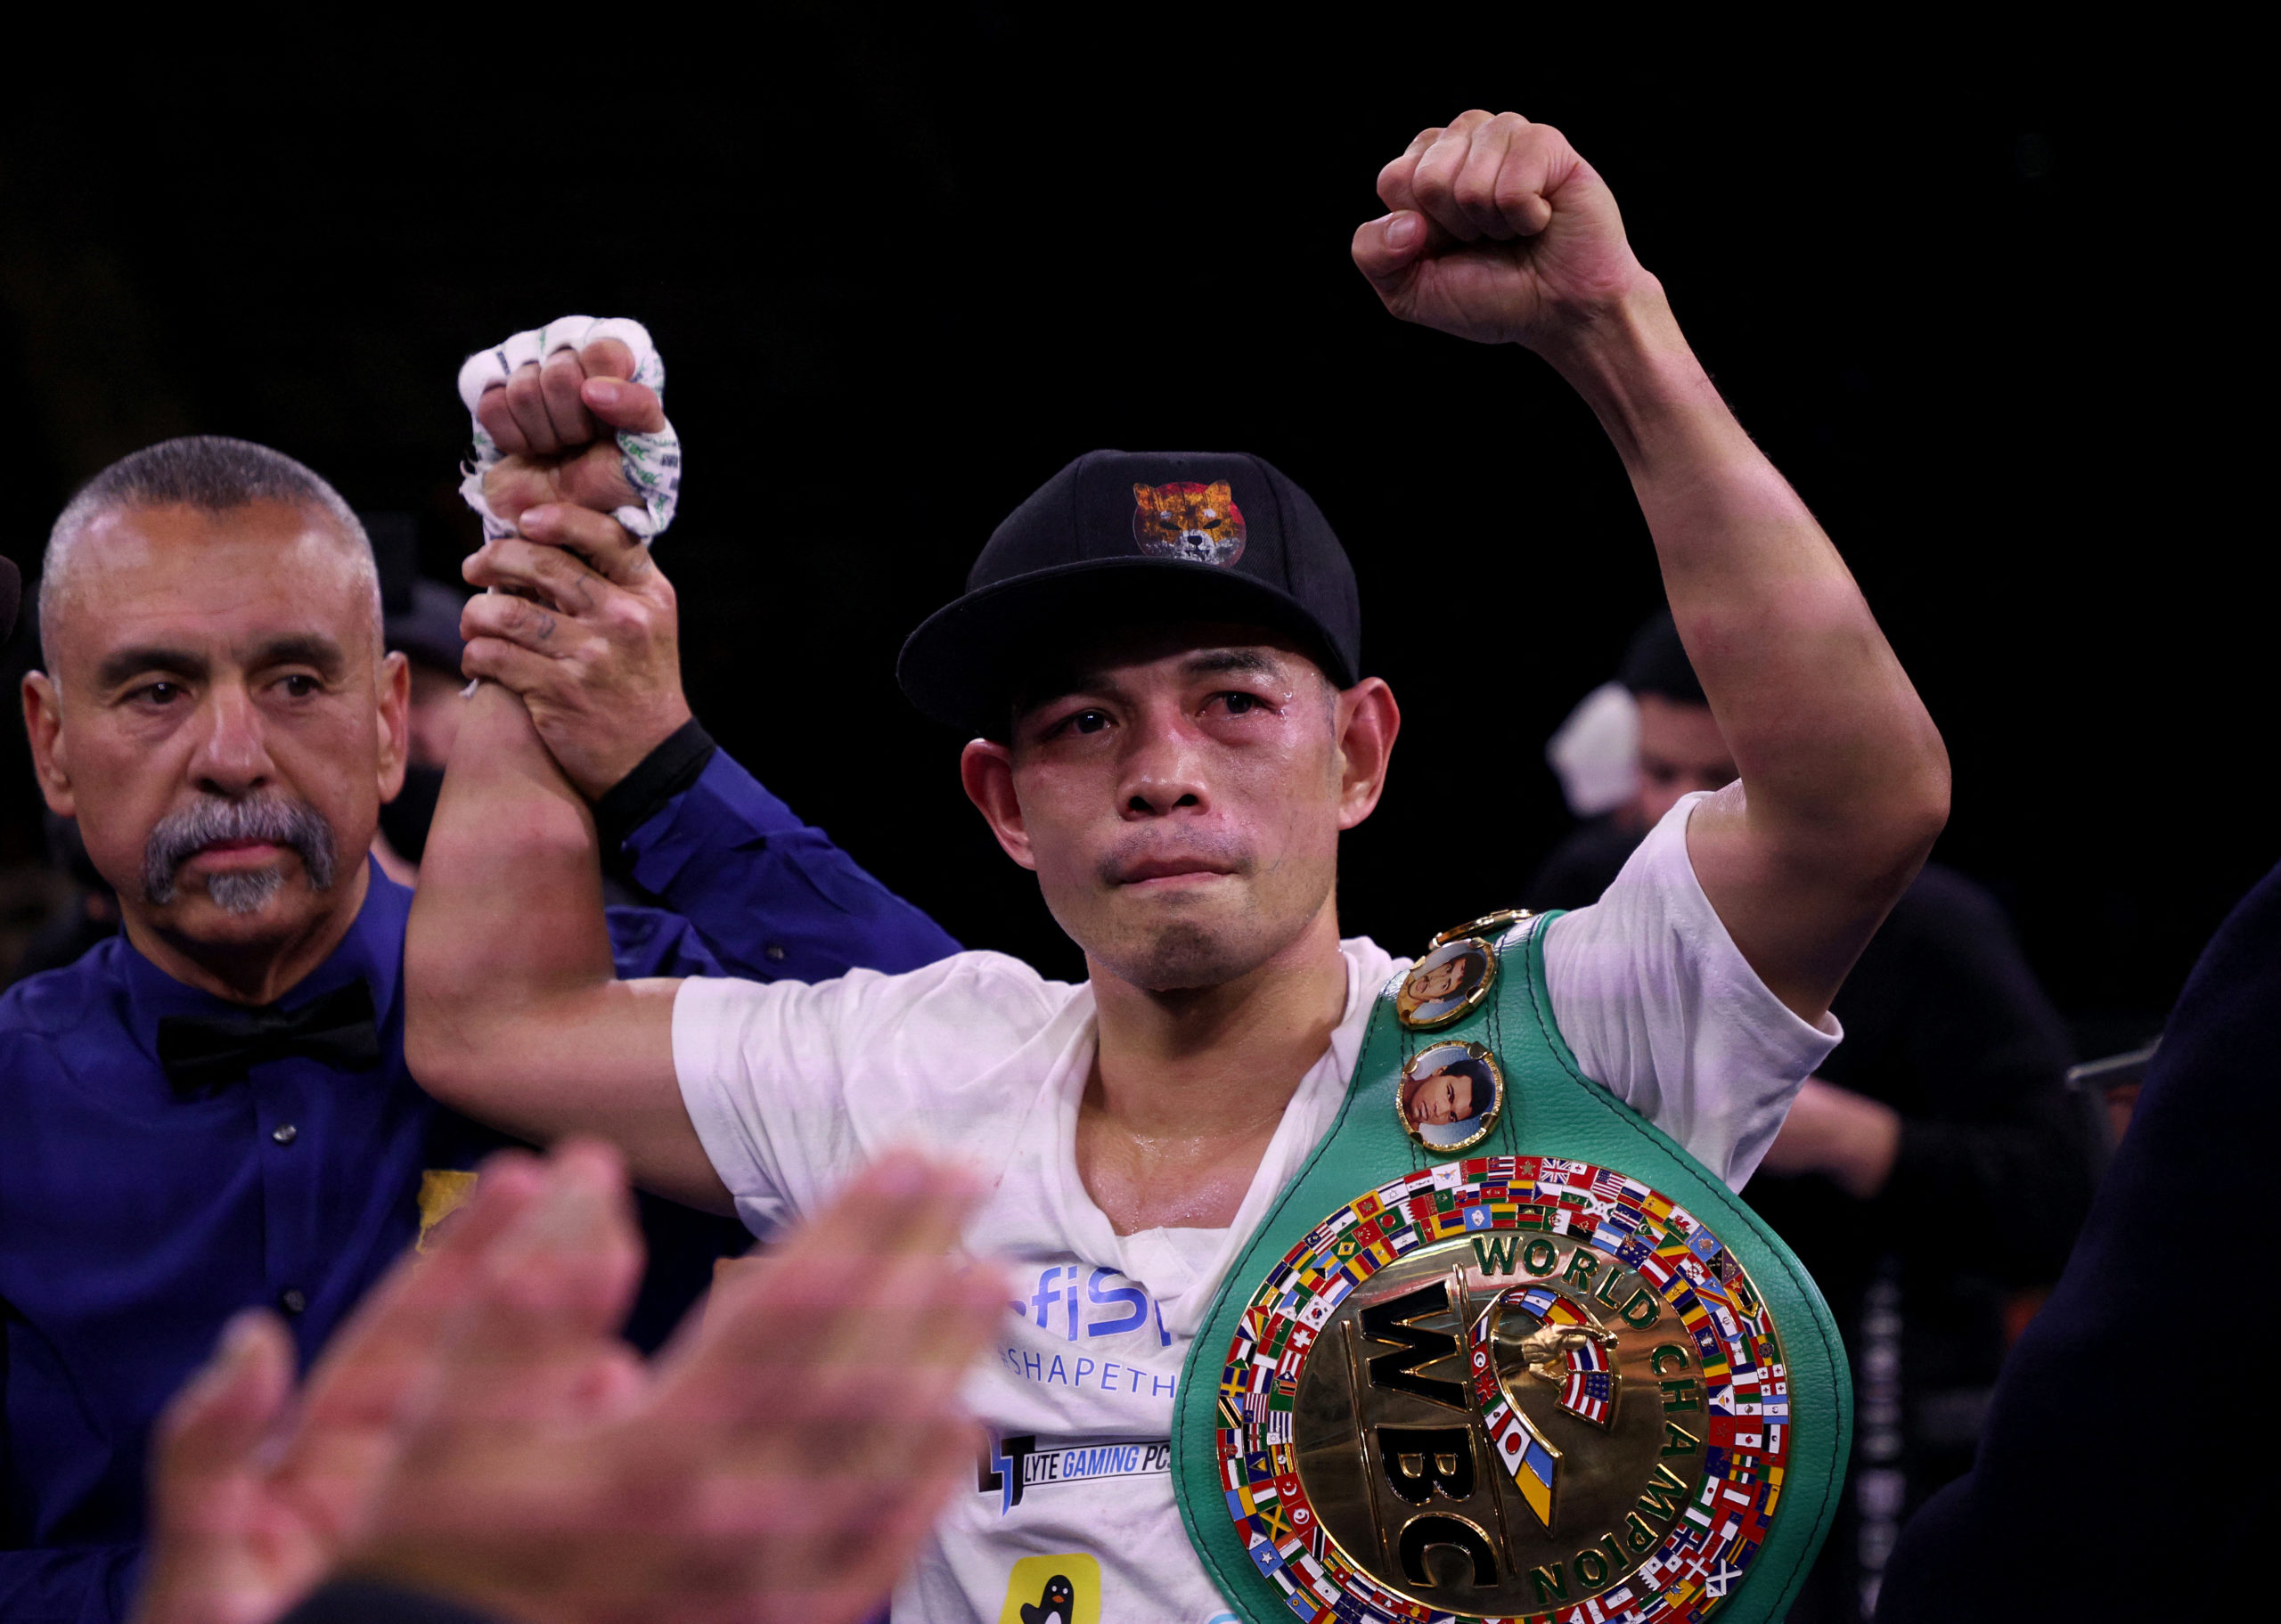 Nonito Donaire reacts after a third round knockout win over Reymart Gaballo for the WBC World Bantamweight Championship at Dignity Health Sports Park on December 11, 2021 in Carson, California.